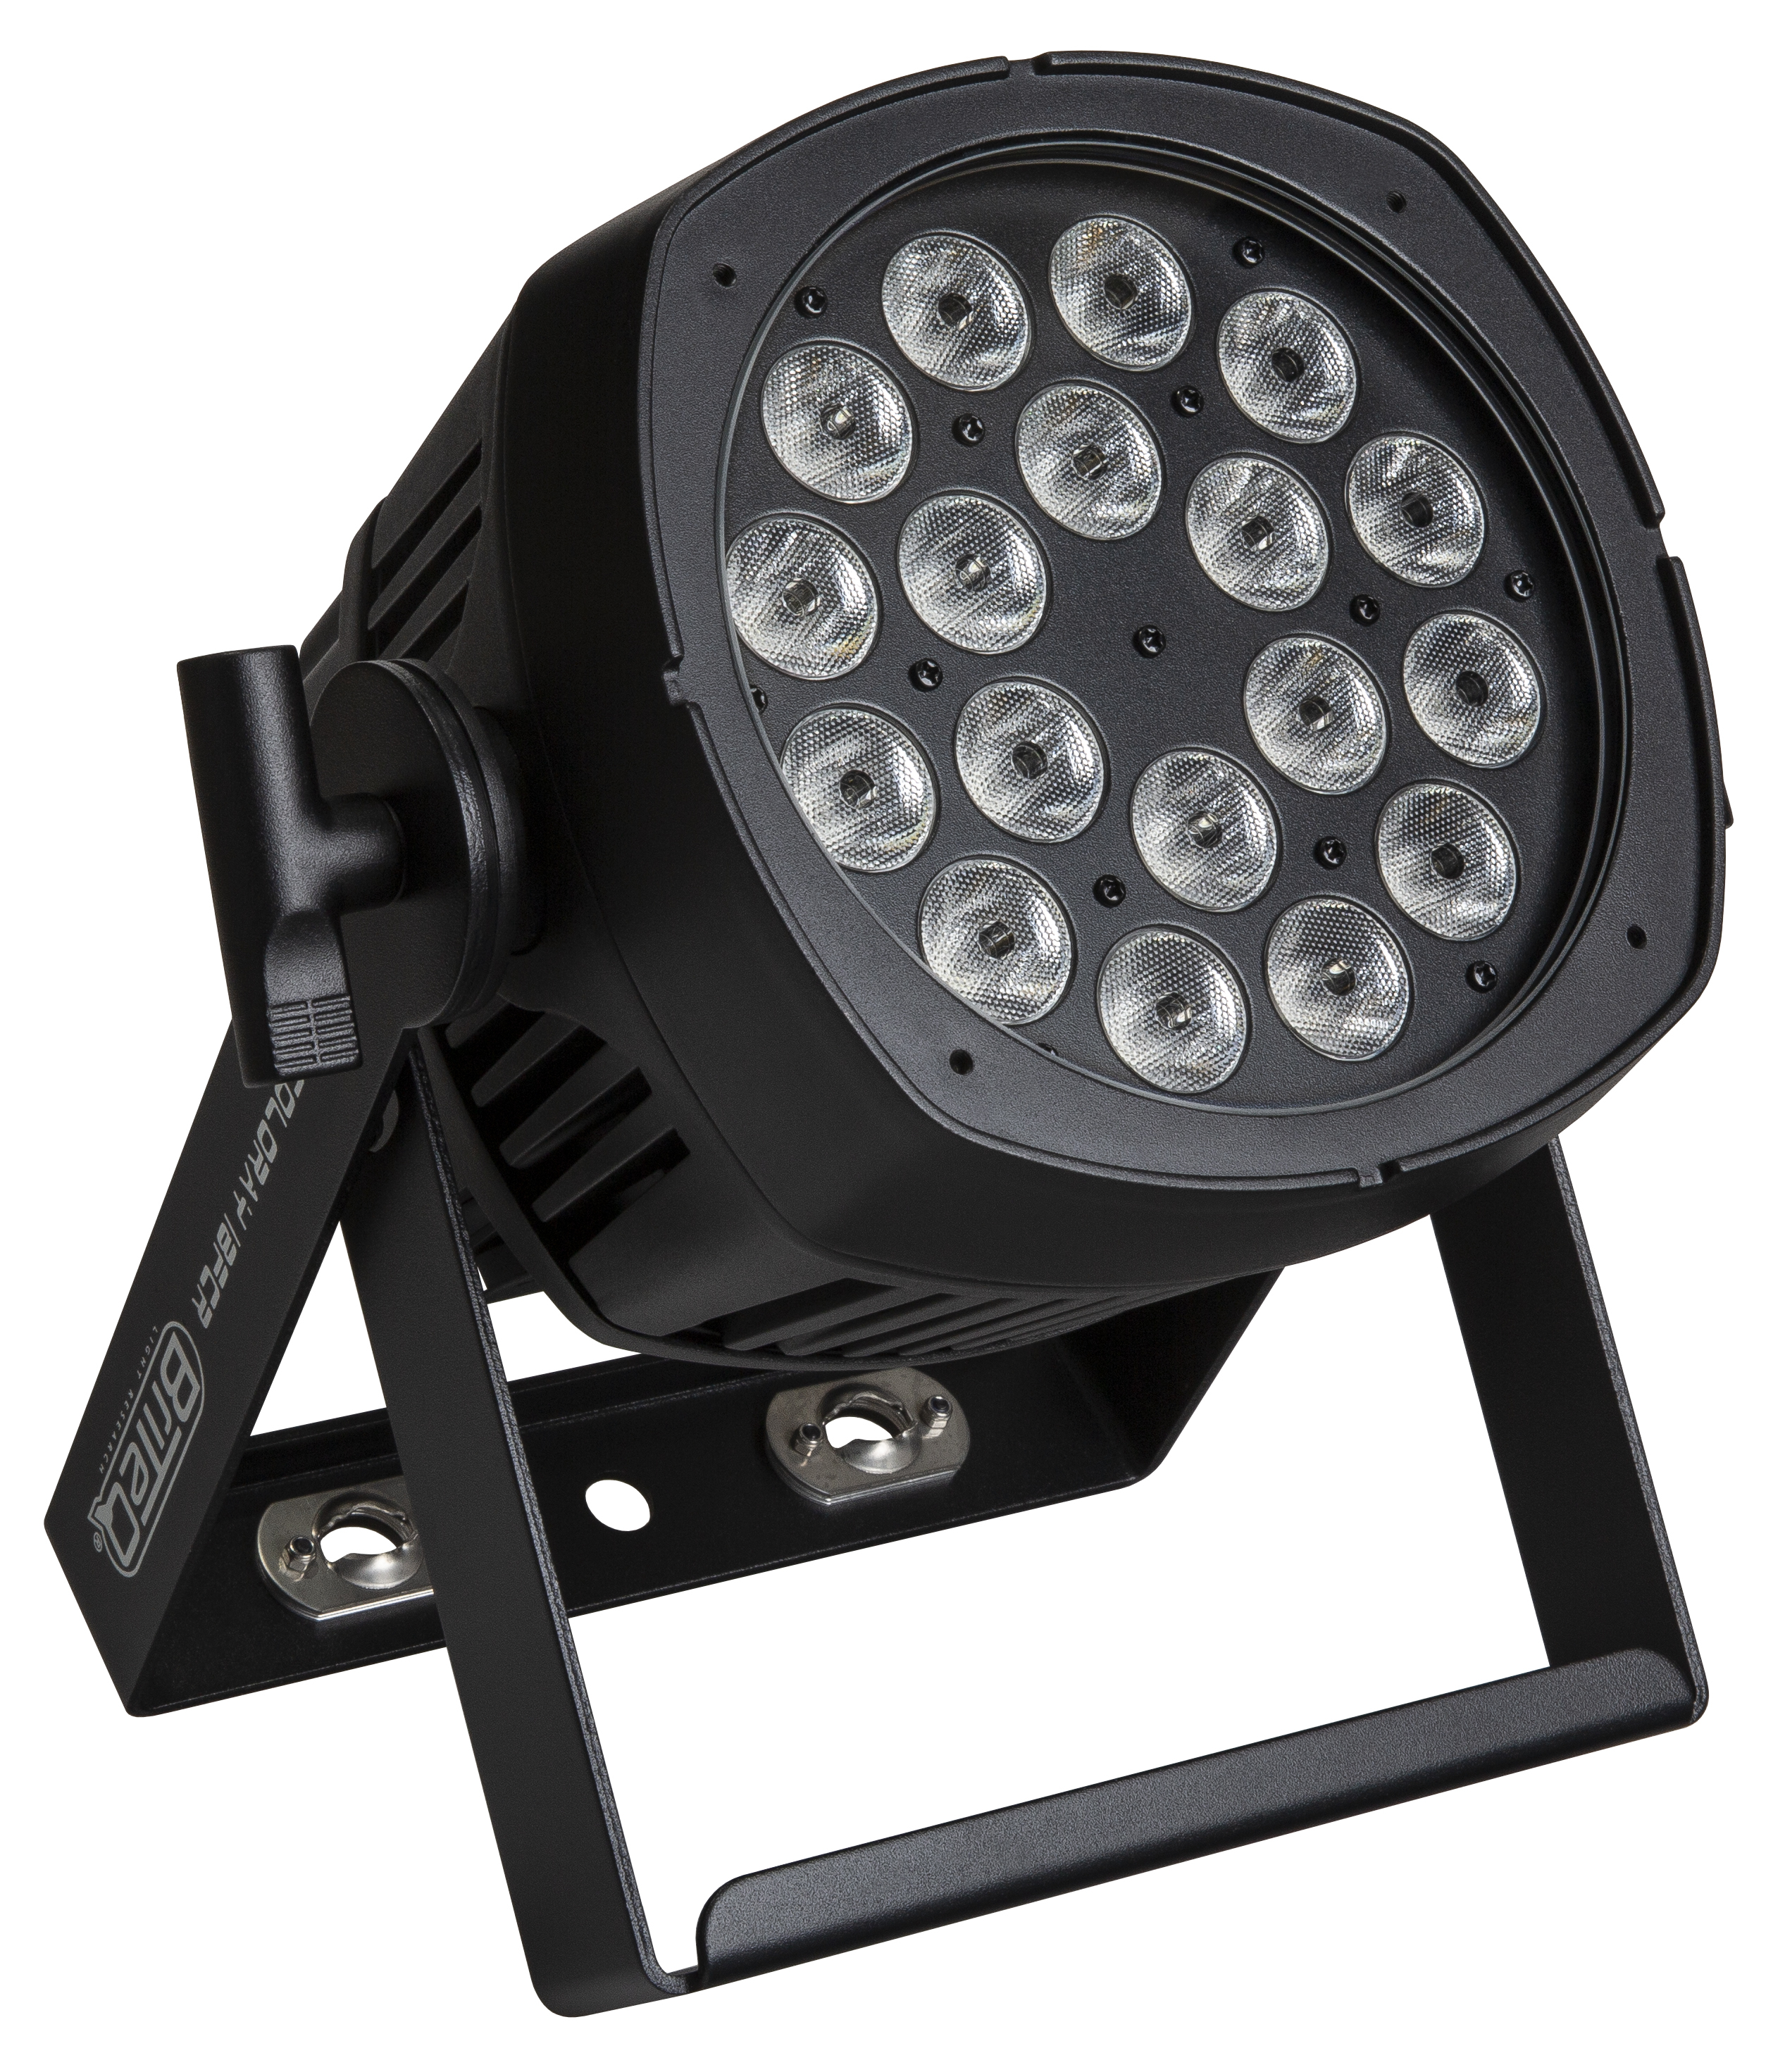 Outdoor projector with 18x8W RGBW leds, 20- beam angle and Neutrik TRUE1 Powercon and 5P XLR connectors and IP-fan cooling